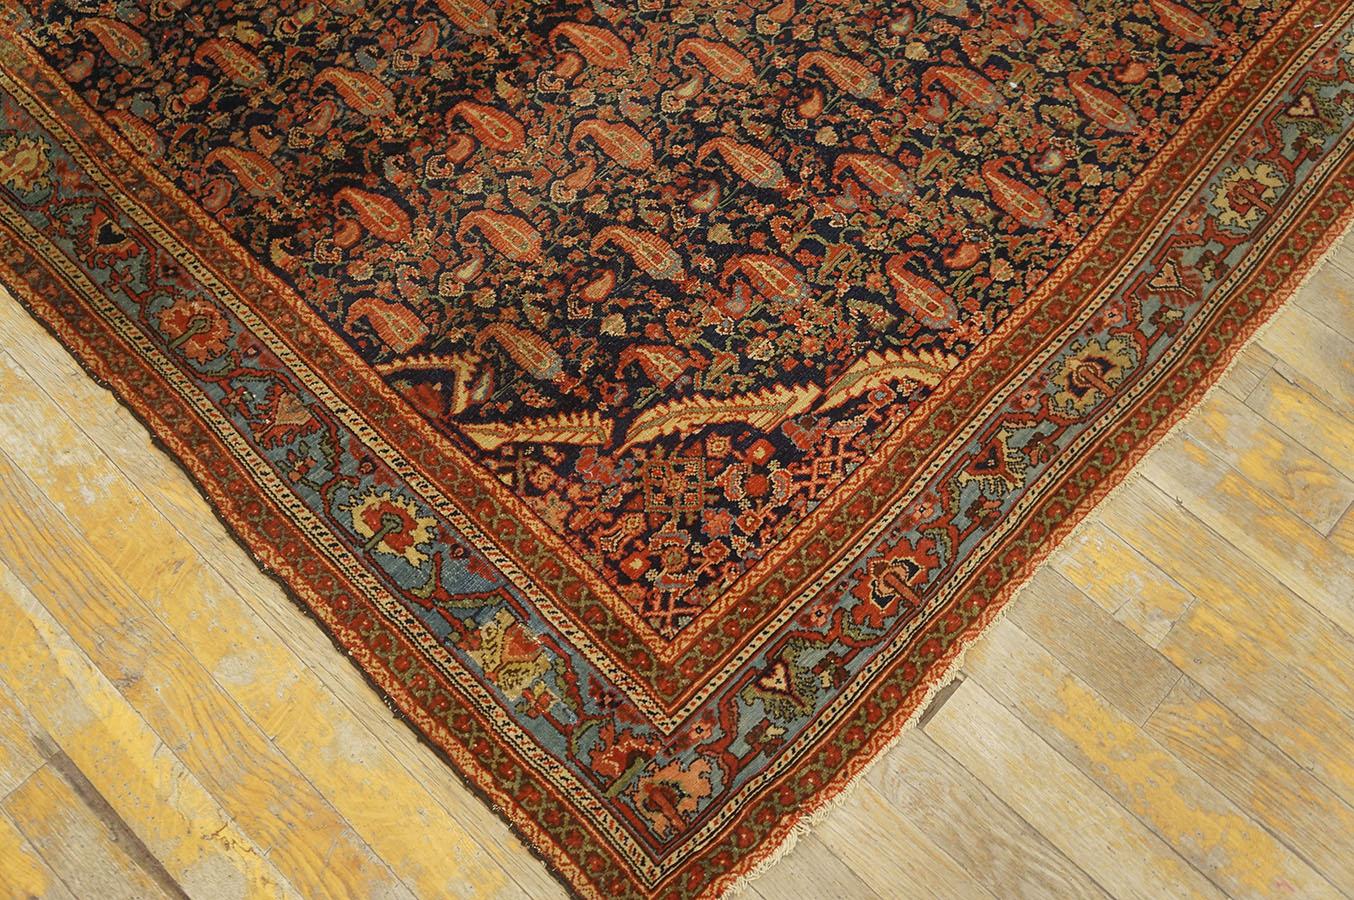 Late 19th Century Persian Malayer Carpet ( 5' x 6' 2'' - 152 x 188 cm ) For Sale 1